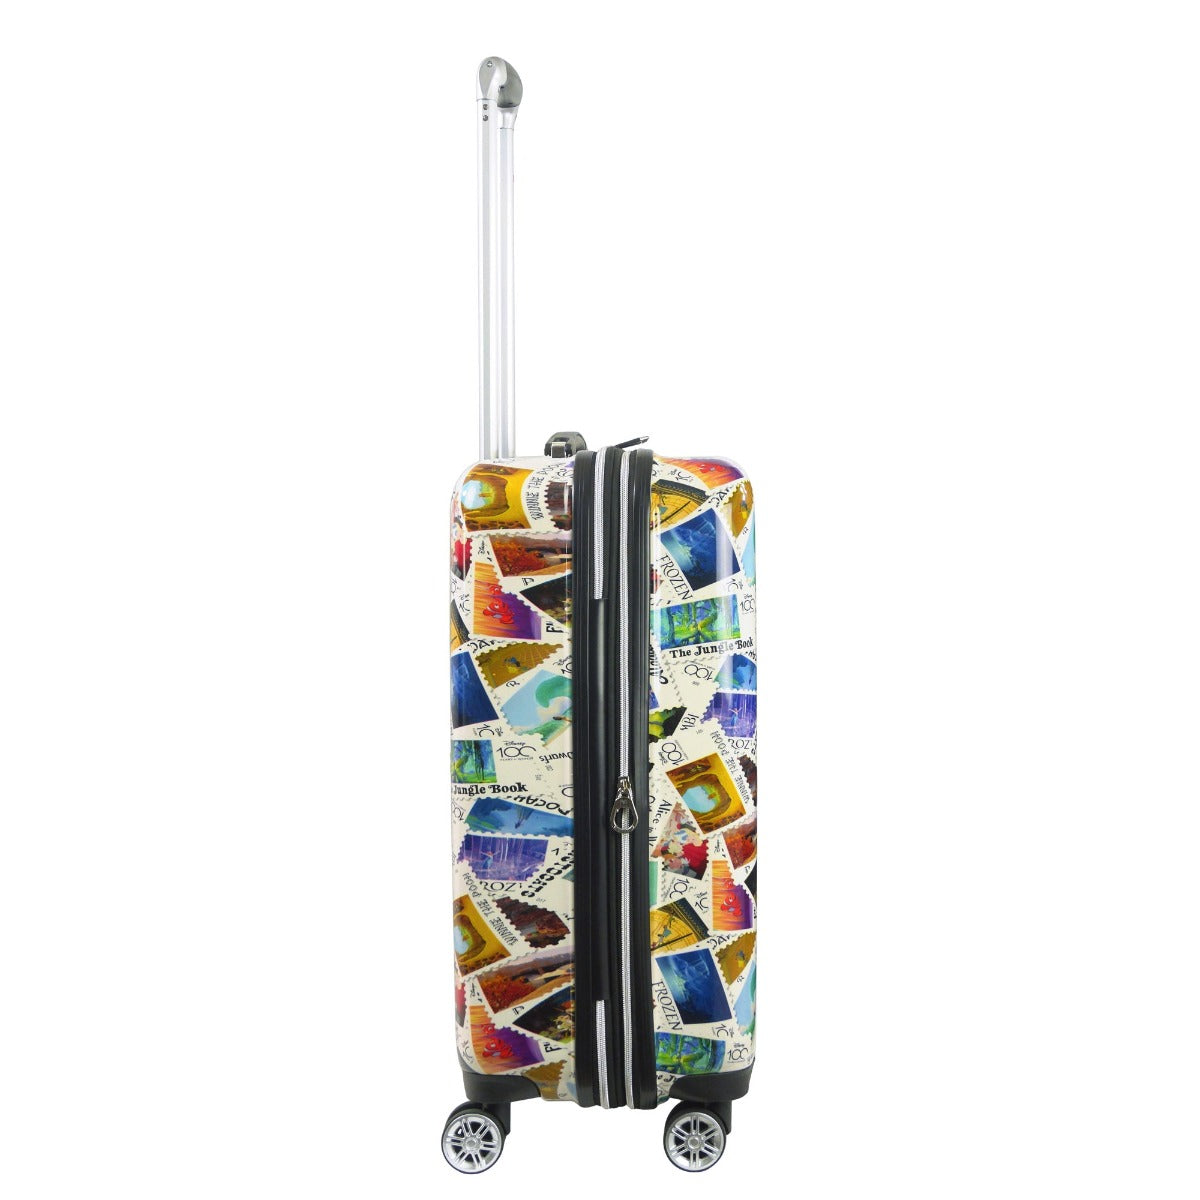 Ful Disney 100 Year Anniversary Stamps ABS Hardsided Spinner Suitcase 26" Checked Luggage limited edition 360 degree wheels retractable handle